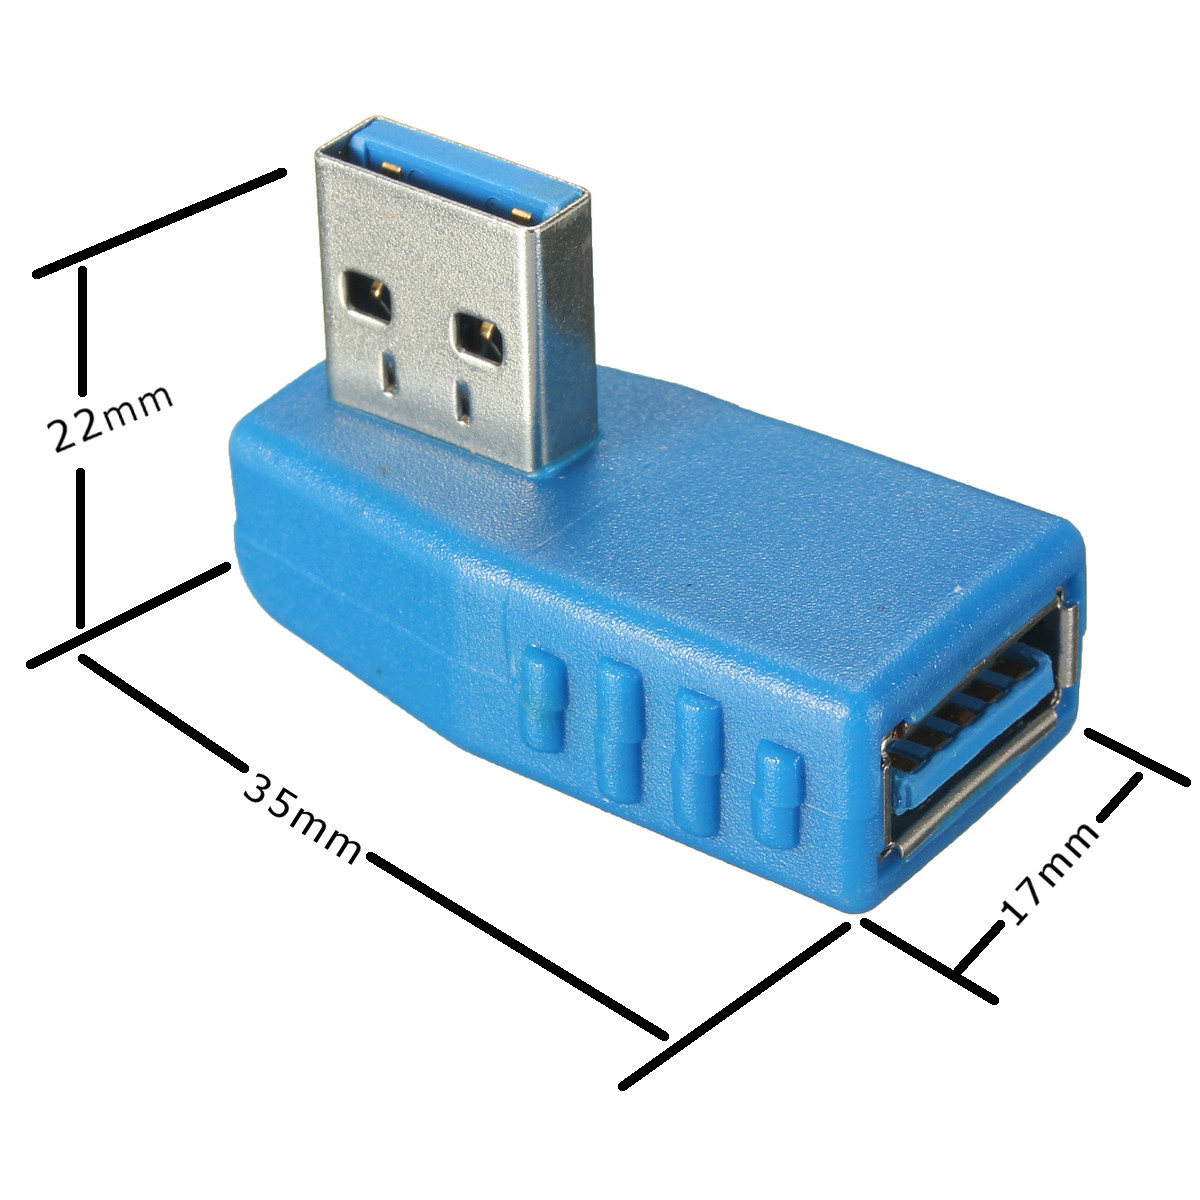 90-Degree-Right-Angled-USB-30-Male-to-USB-30-Female-Adapter-Converter-USB-Connector-1202909